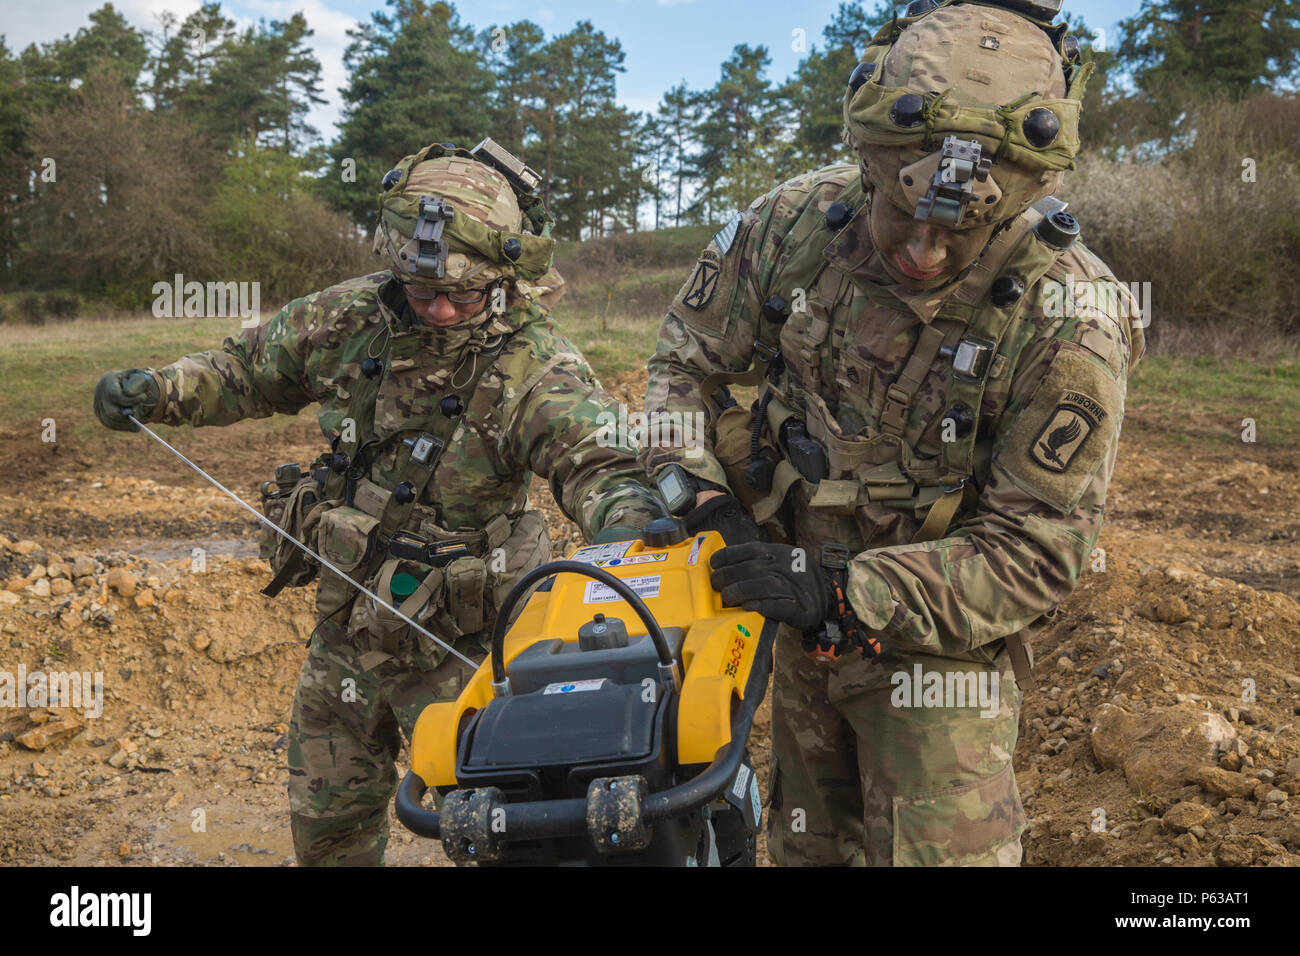 U.S. Soldiers of Bravo Company, 54th Brigade Engineer Battalion, 173rd Airborne Brigade start a compactor while conducting a repair on a simulated airstrip during Saber Junction 16 at the U.S. Army’s Joint Multinational Readiness Center (JMRC) in Hohenfels, Germany, April 13, 2016. Saber Junction 16 is the U.S. Army Europe’s 173rd Airborne Brigade’s combat training center certification exercise, taking place at the JMRC in Hohenfels, Germany, Mar. 31-Apr. 24, 2016.  The exercise is designed to evaluate the readiness of the Army’s Europe-based combat brigades to conduct unified land operations  Stock Photo